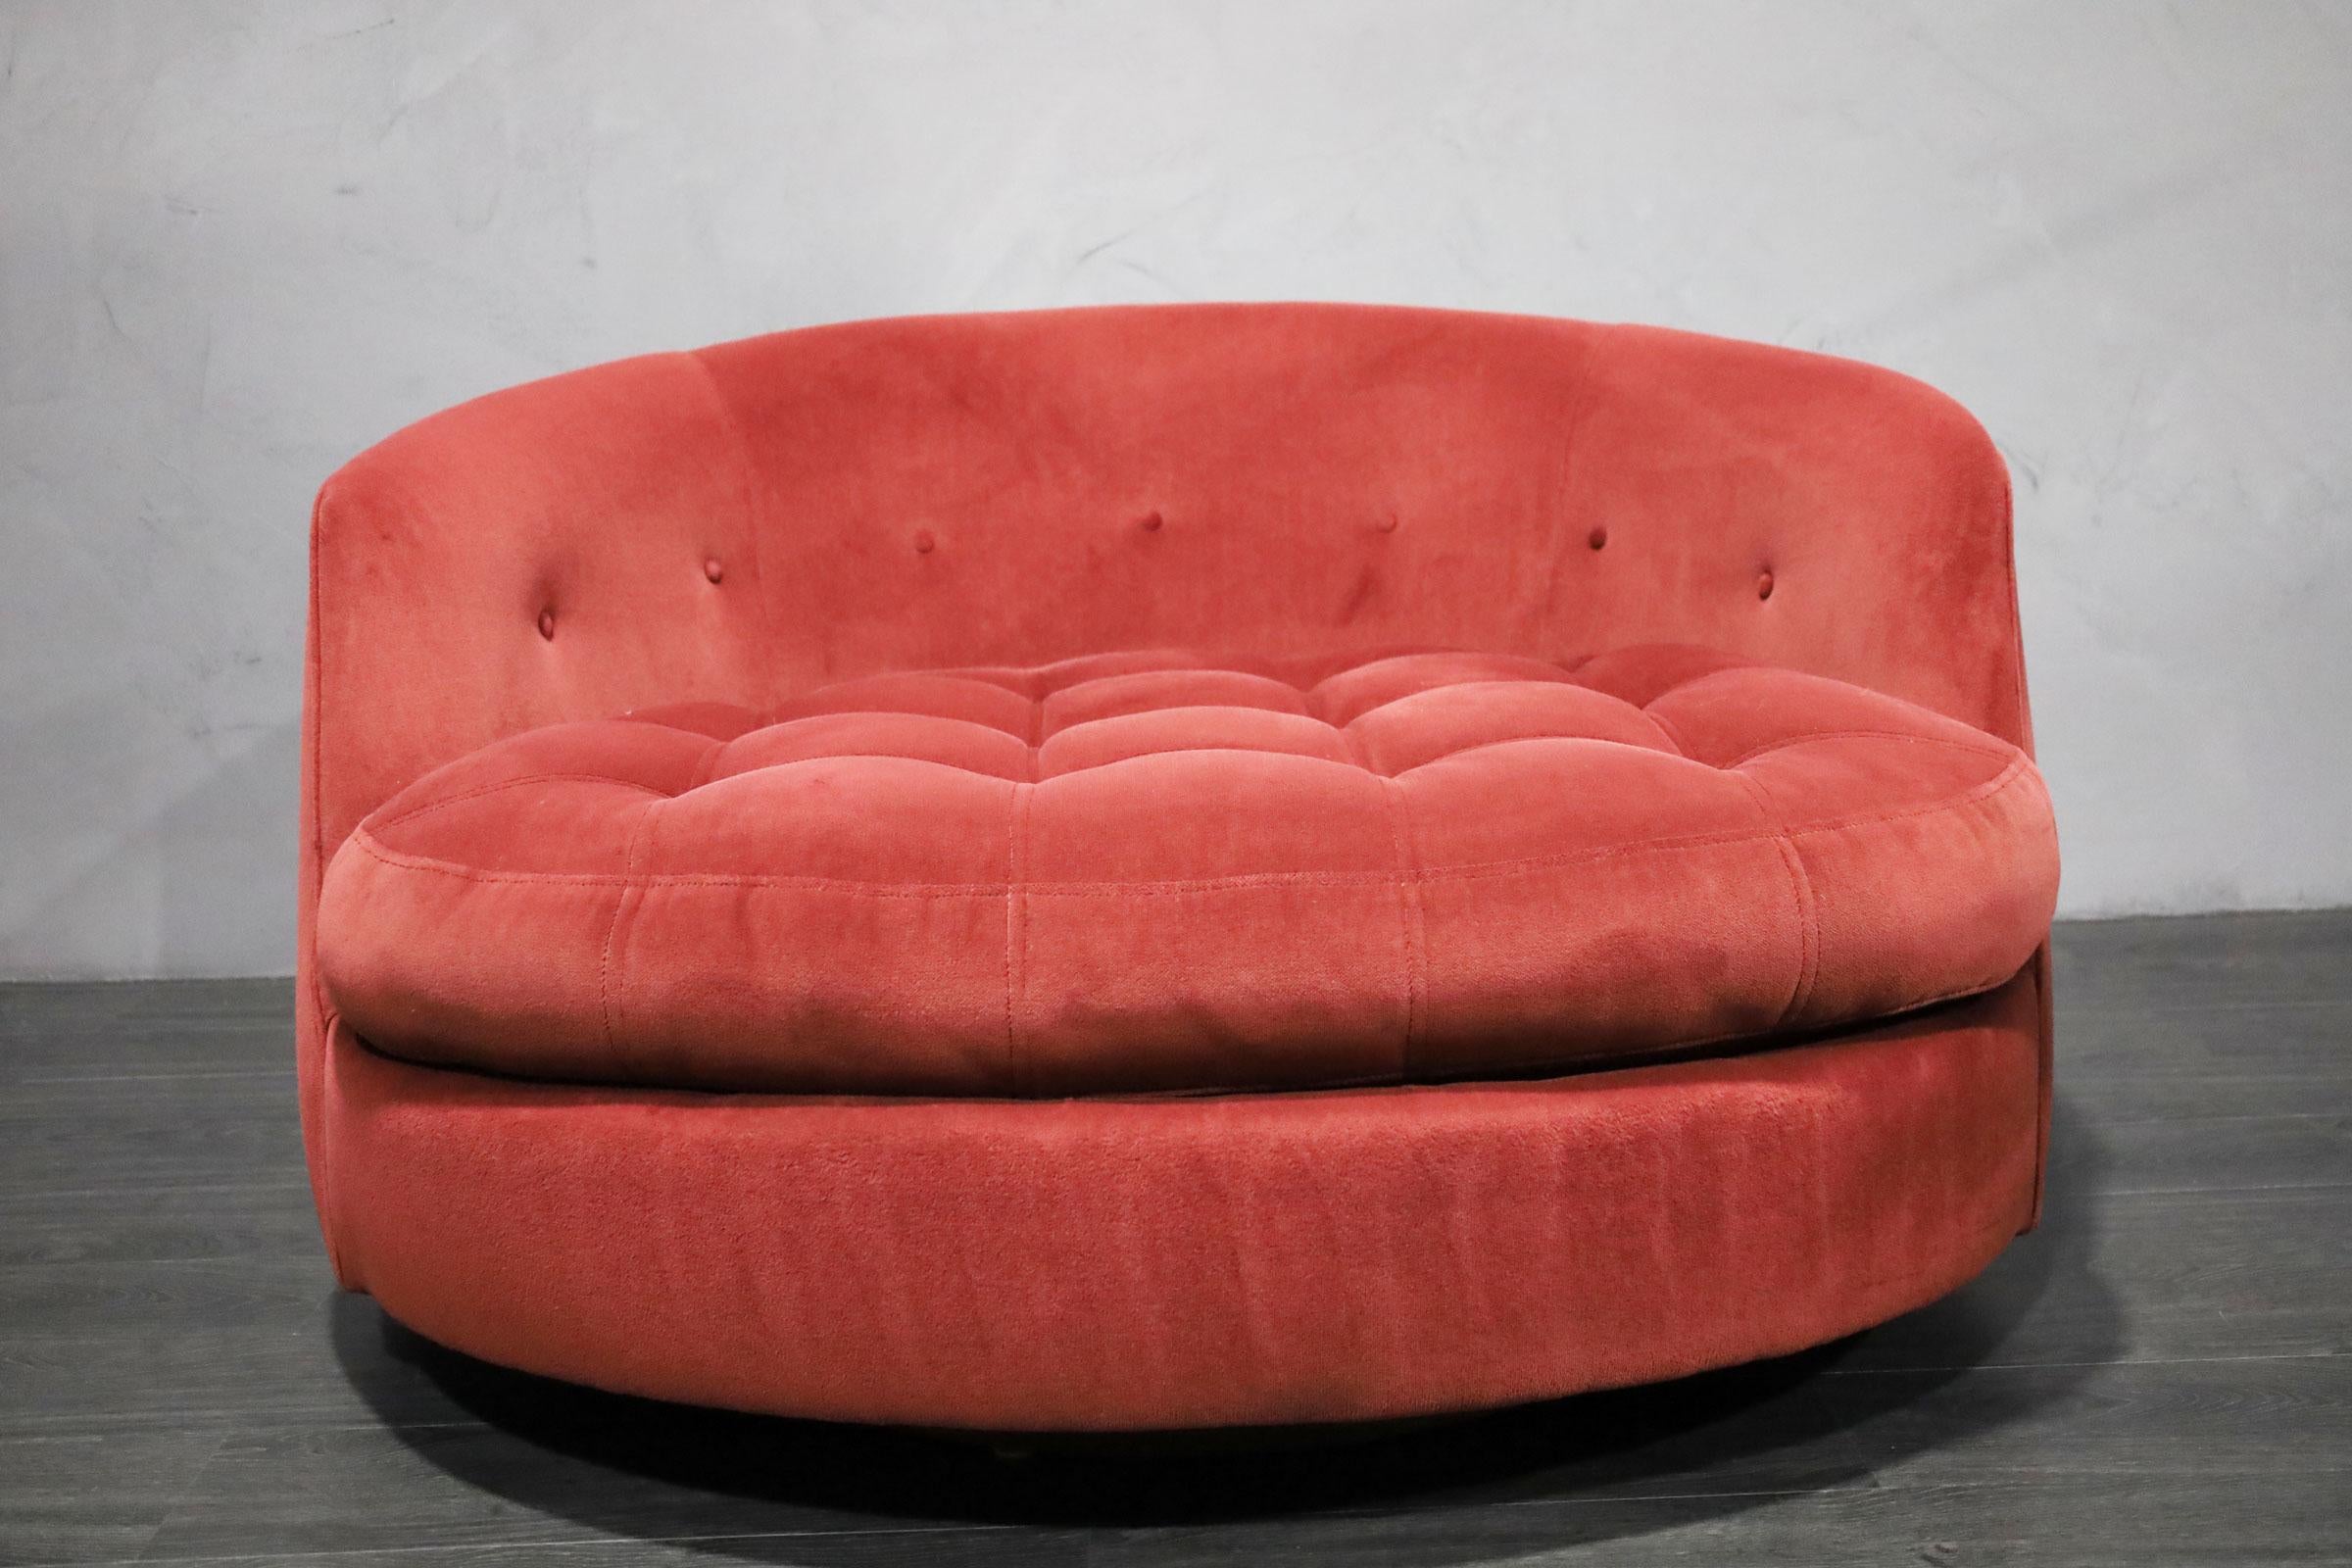 The chair people love to lounge in by Milo Baughman. His iconic large tub chair with swivel base. This one is in a raspberry microfiber that is in very good condition. It can also be reupholstered.